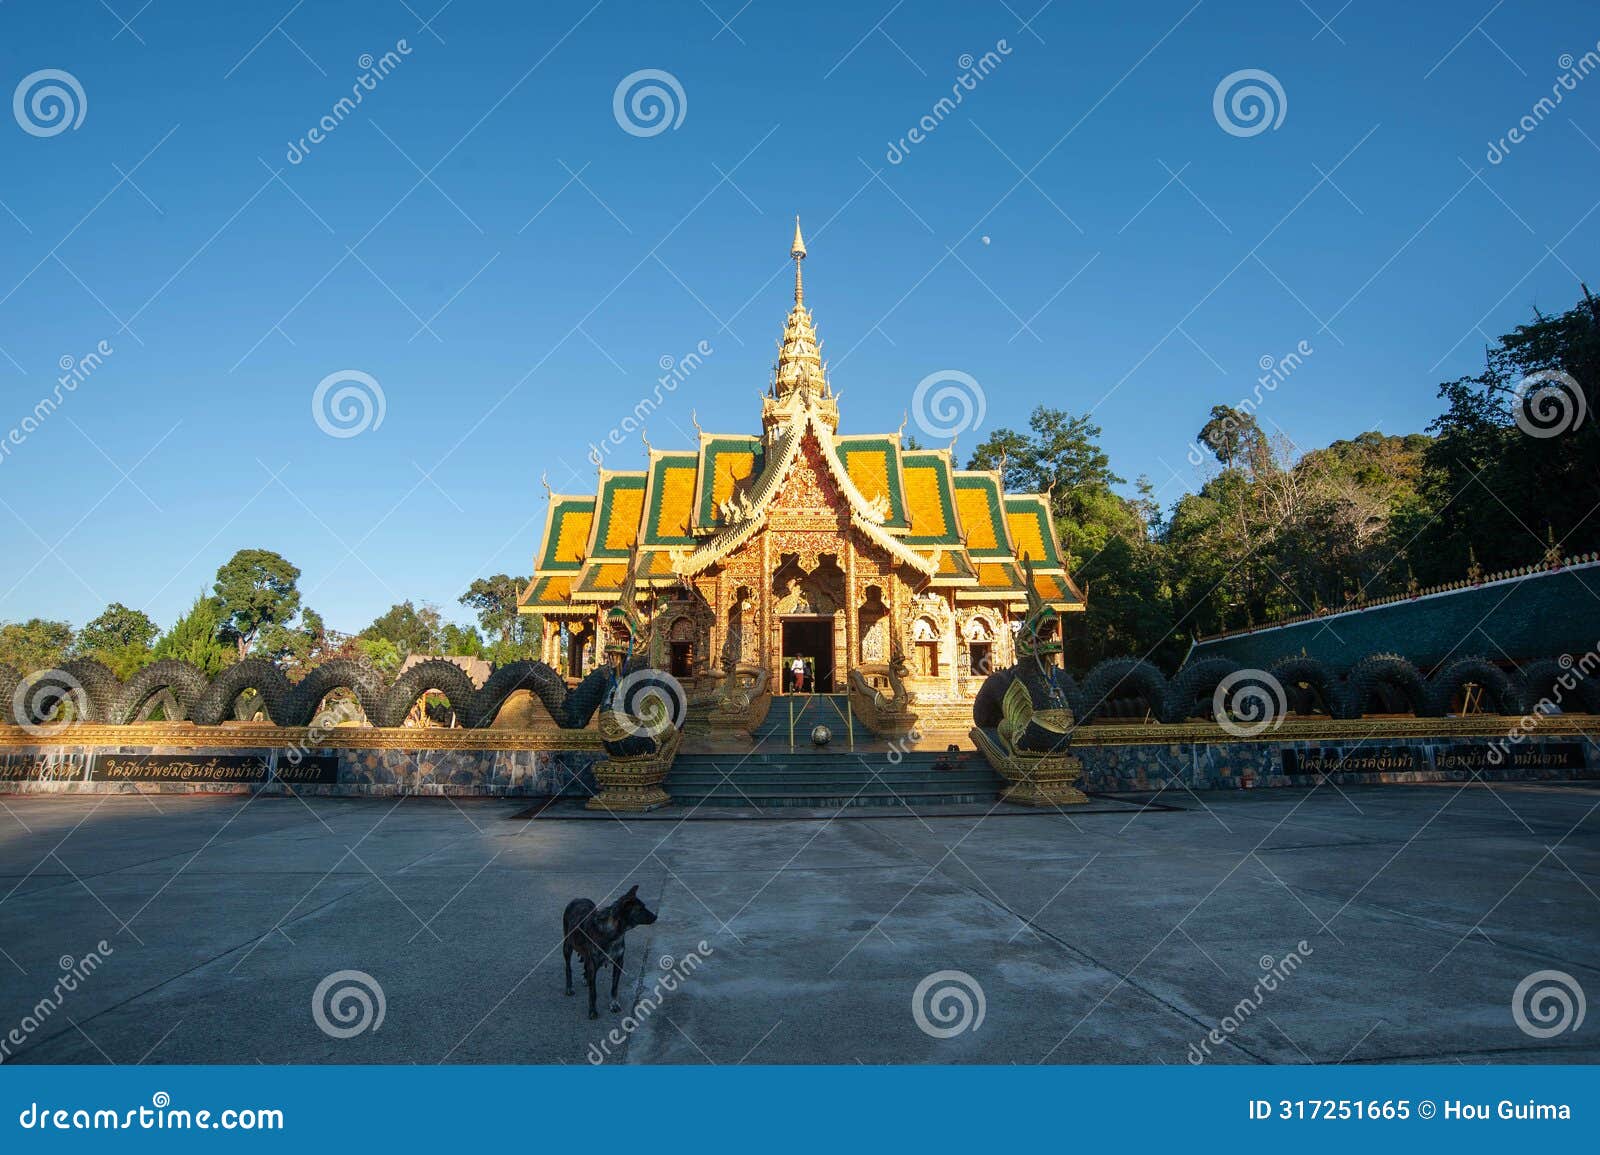 the temple of wat phraphutthabat si roi buddhist temple in chiang mai, thailand